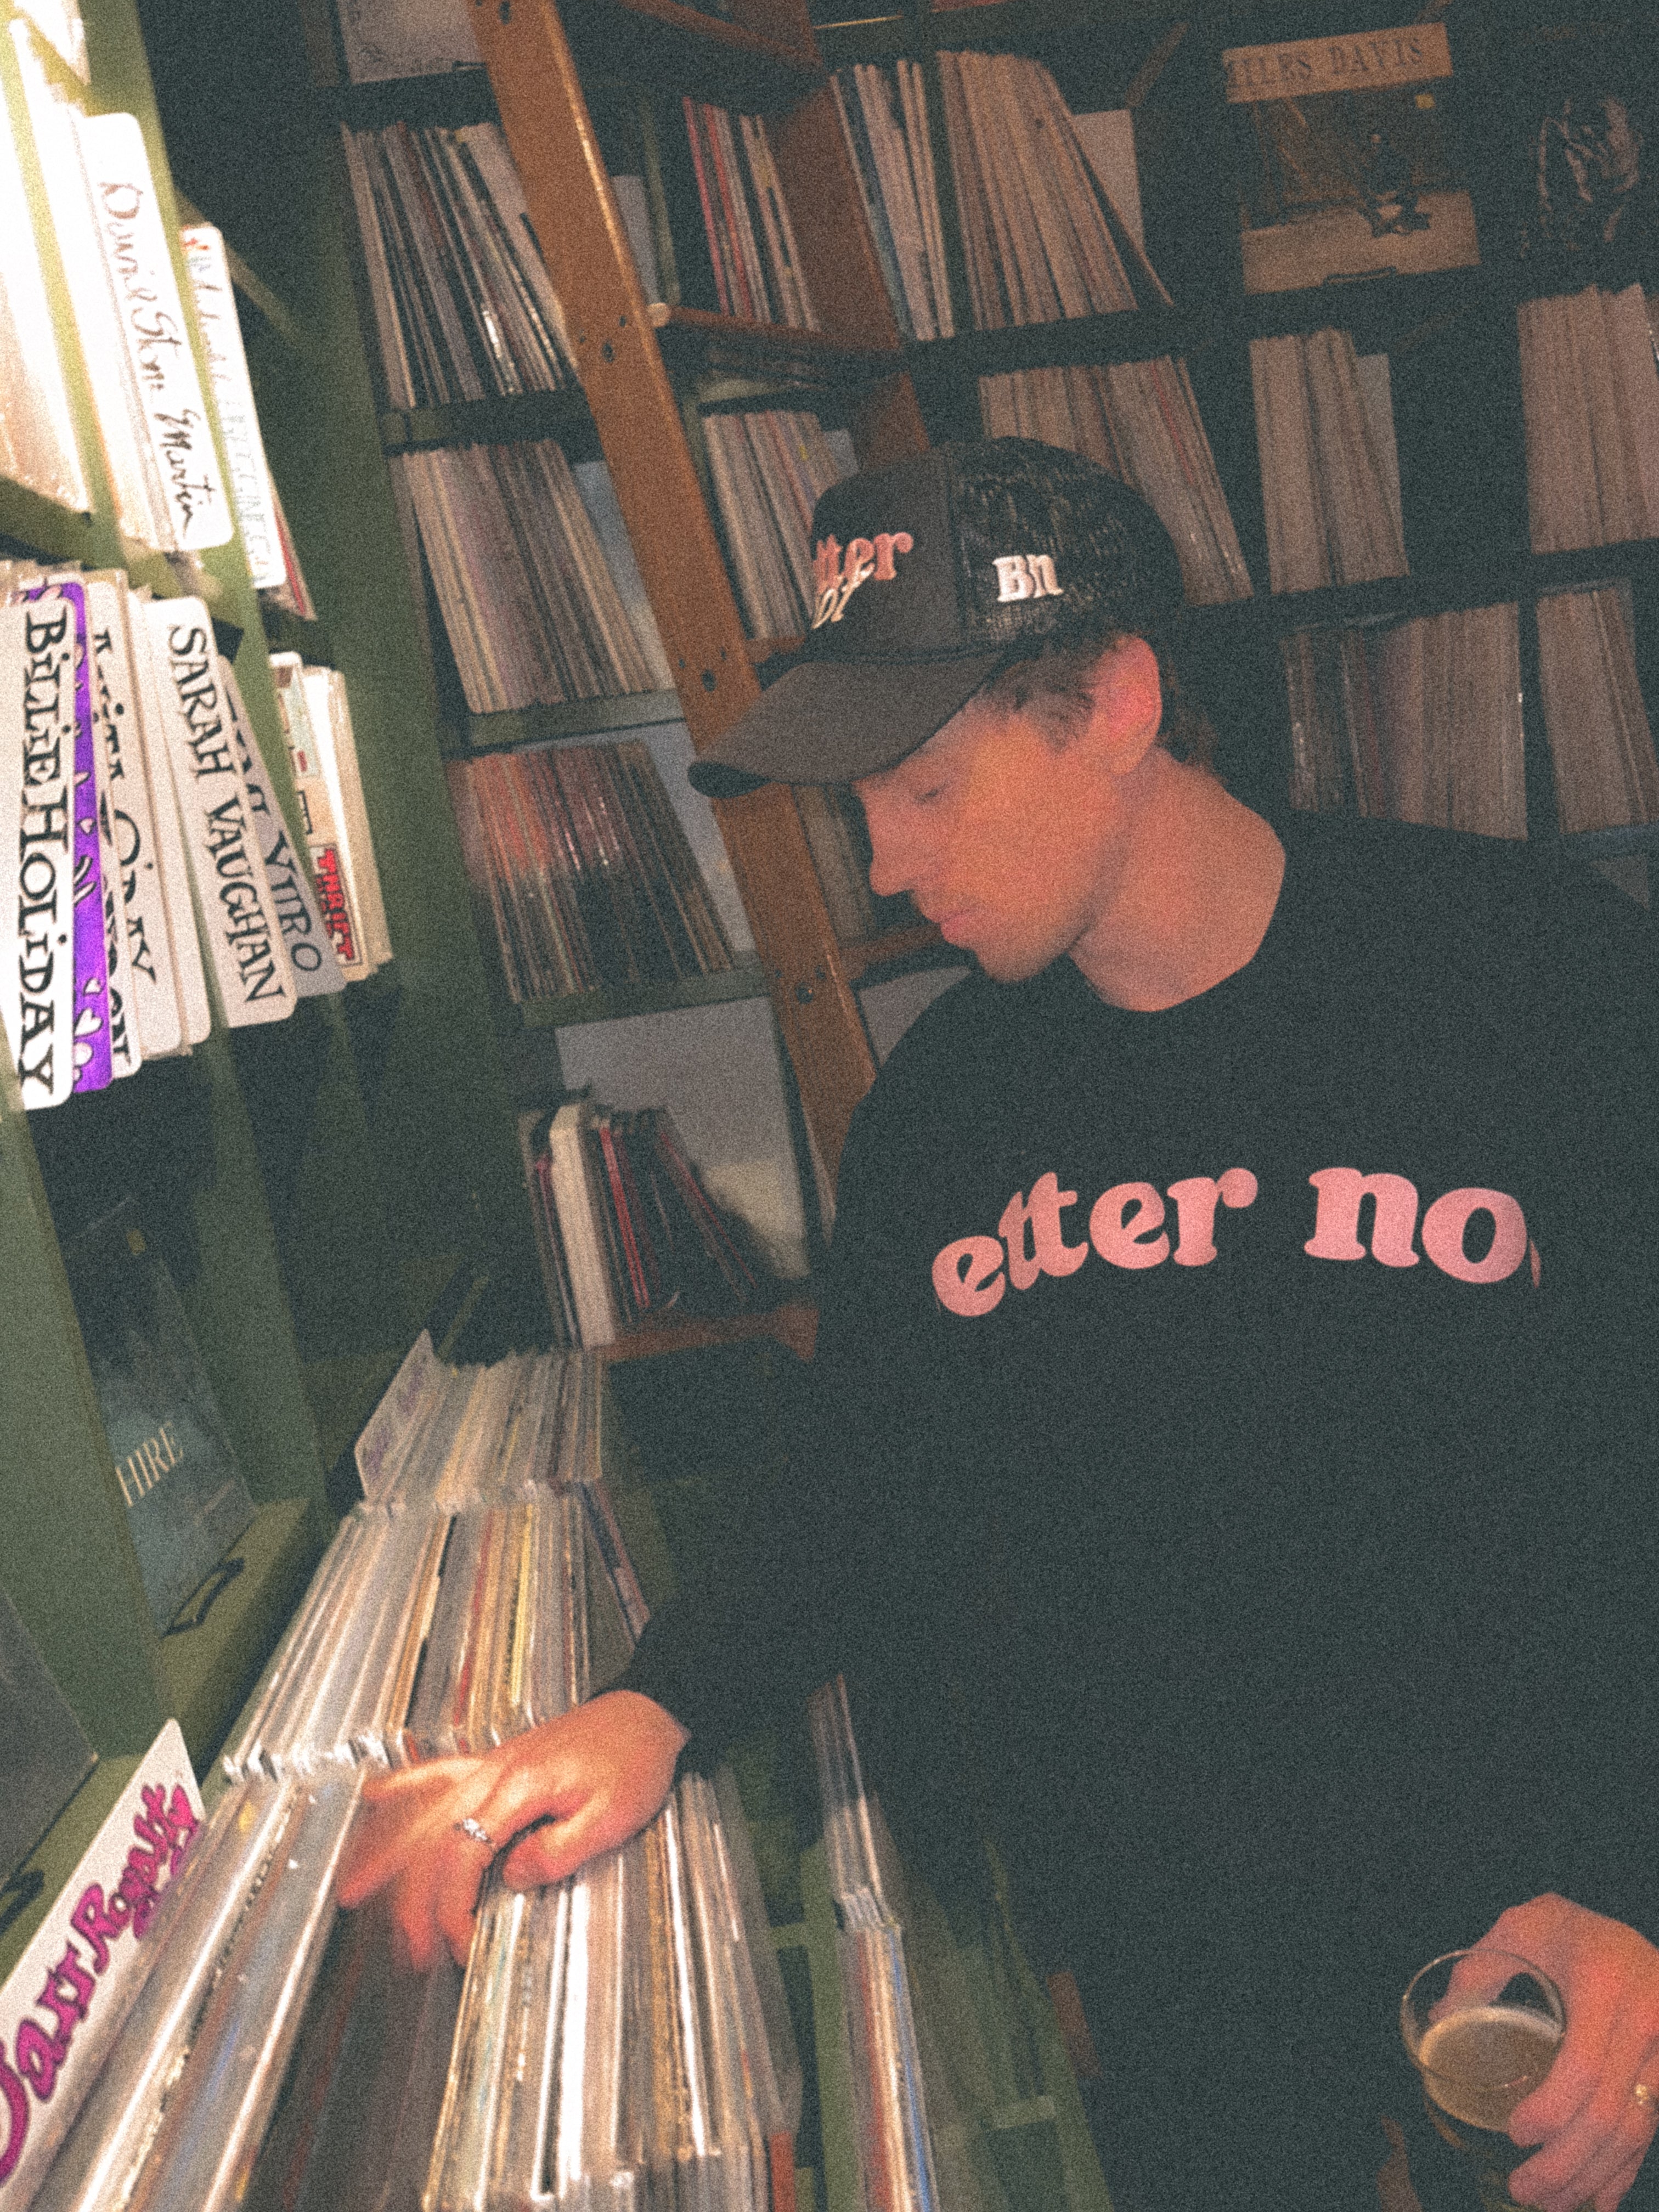 A young man in a black "Better not" Staple Crew sweatshirt with premium ring-spun cotton and cap browsing vinyl records in a dimly lit store, holding a coffee cup.